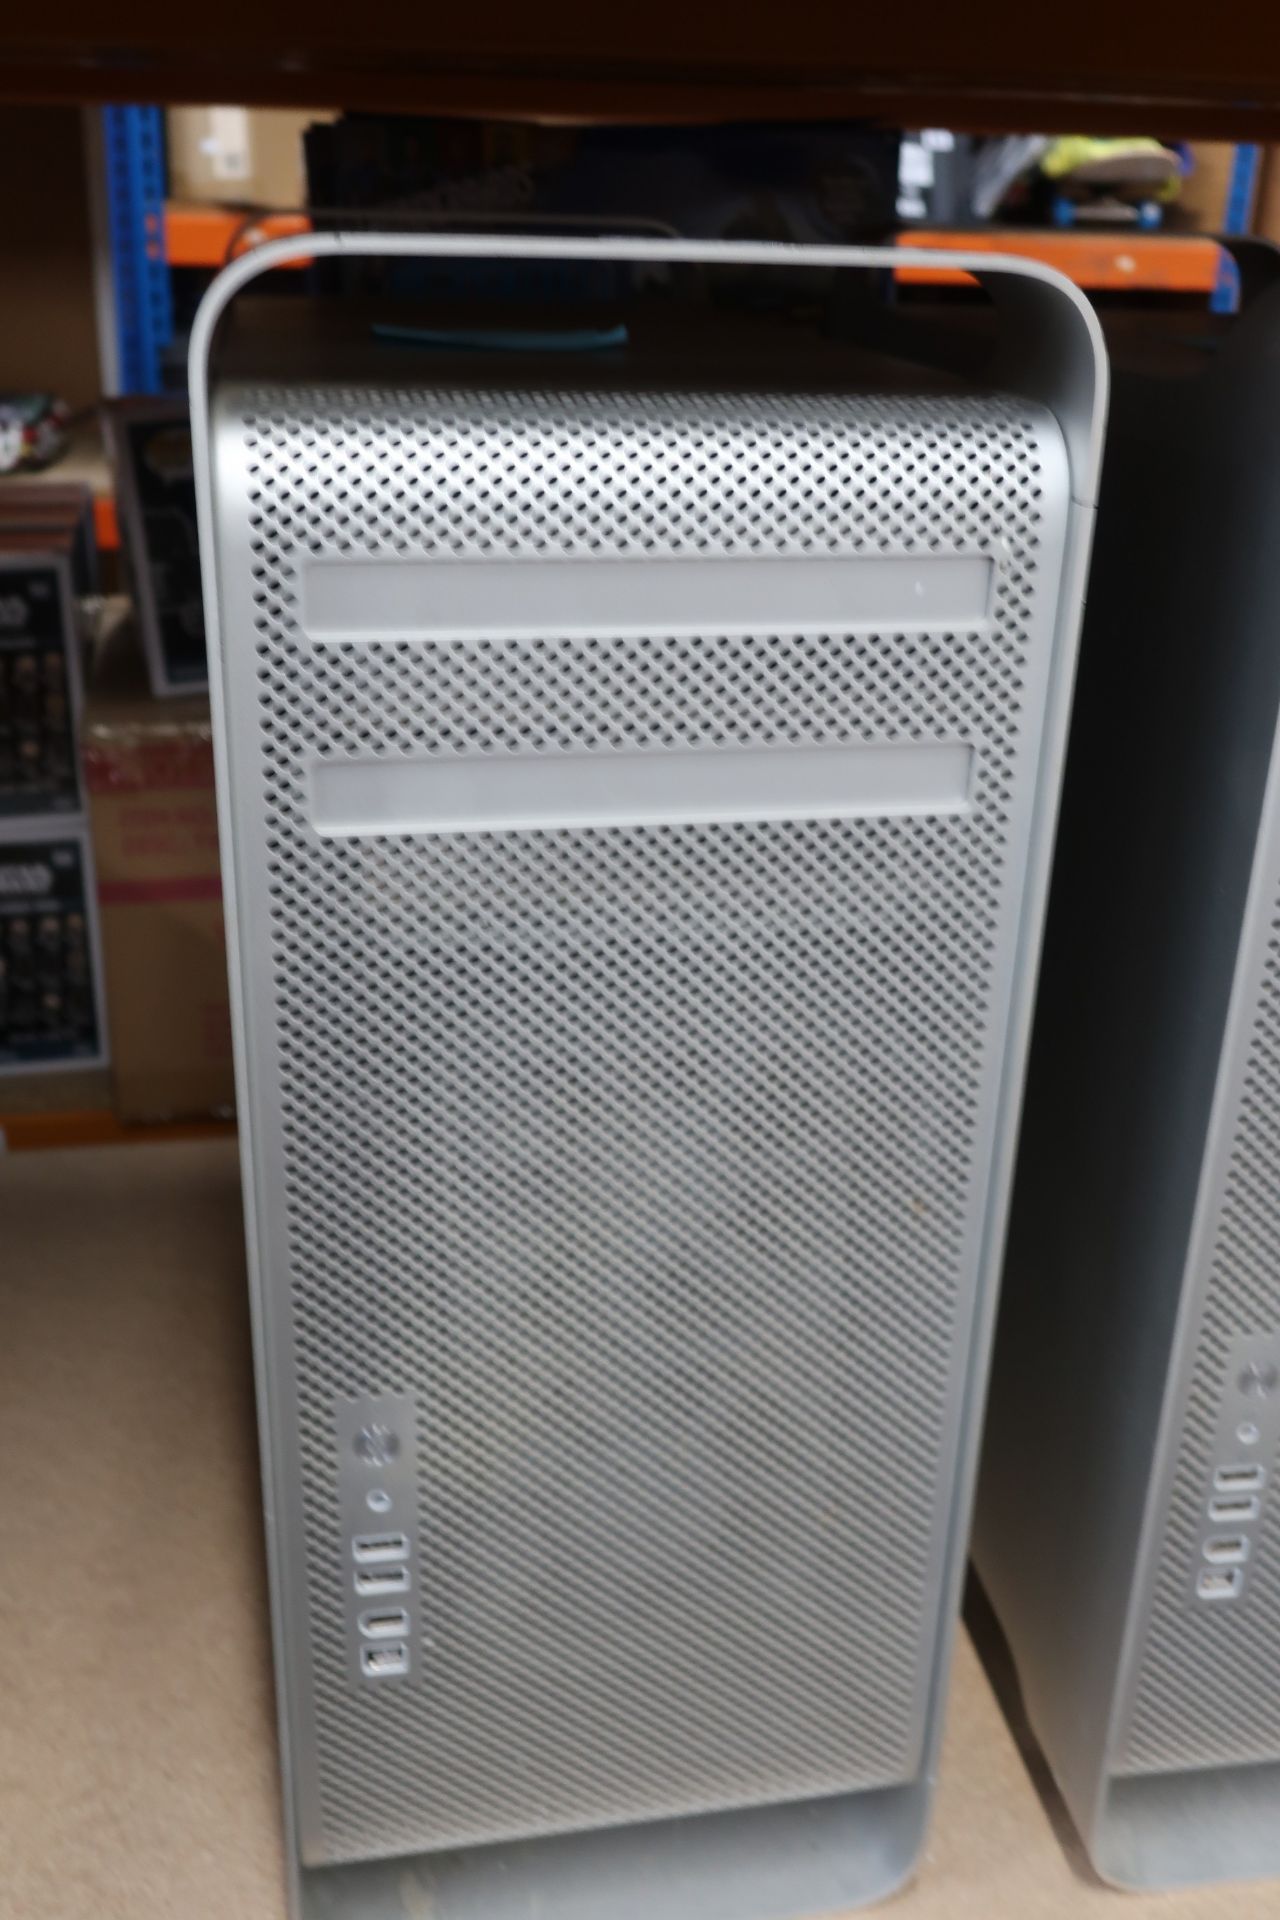 A pre-owned Apple Mac Pro "Eight Core" 3.0 (2,1) A1186 (Serial: CK74607K0GP) (Hard drives removed,